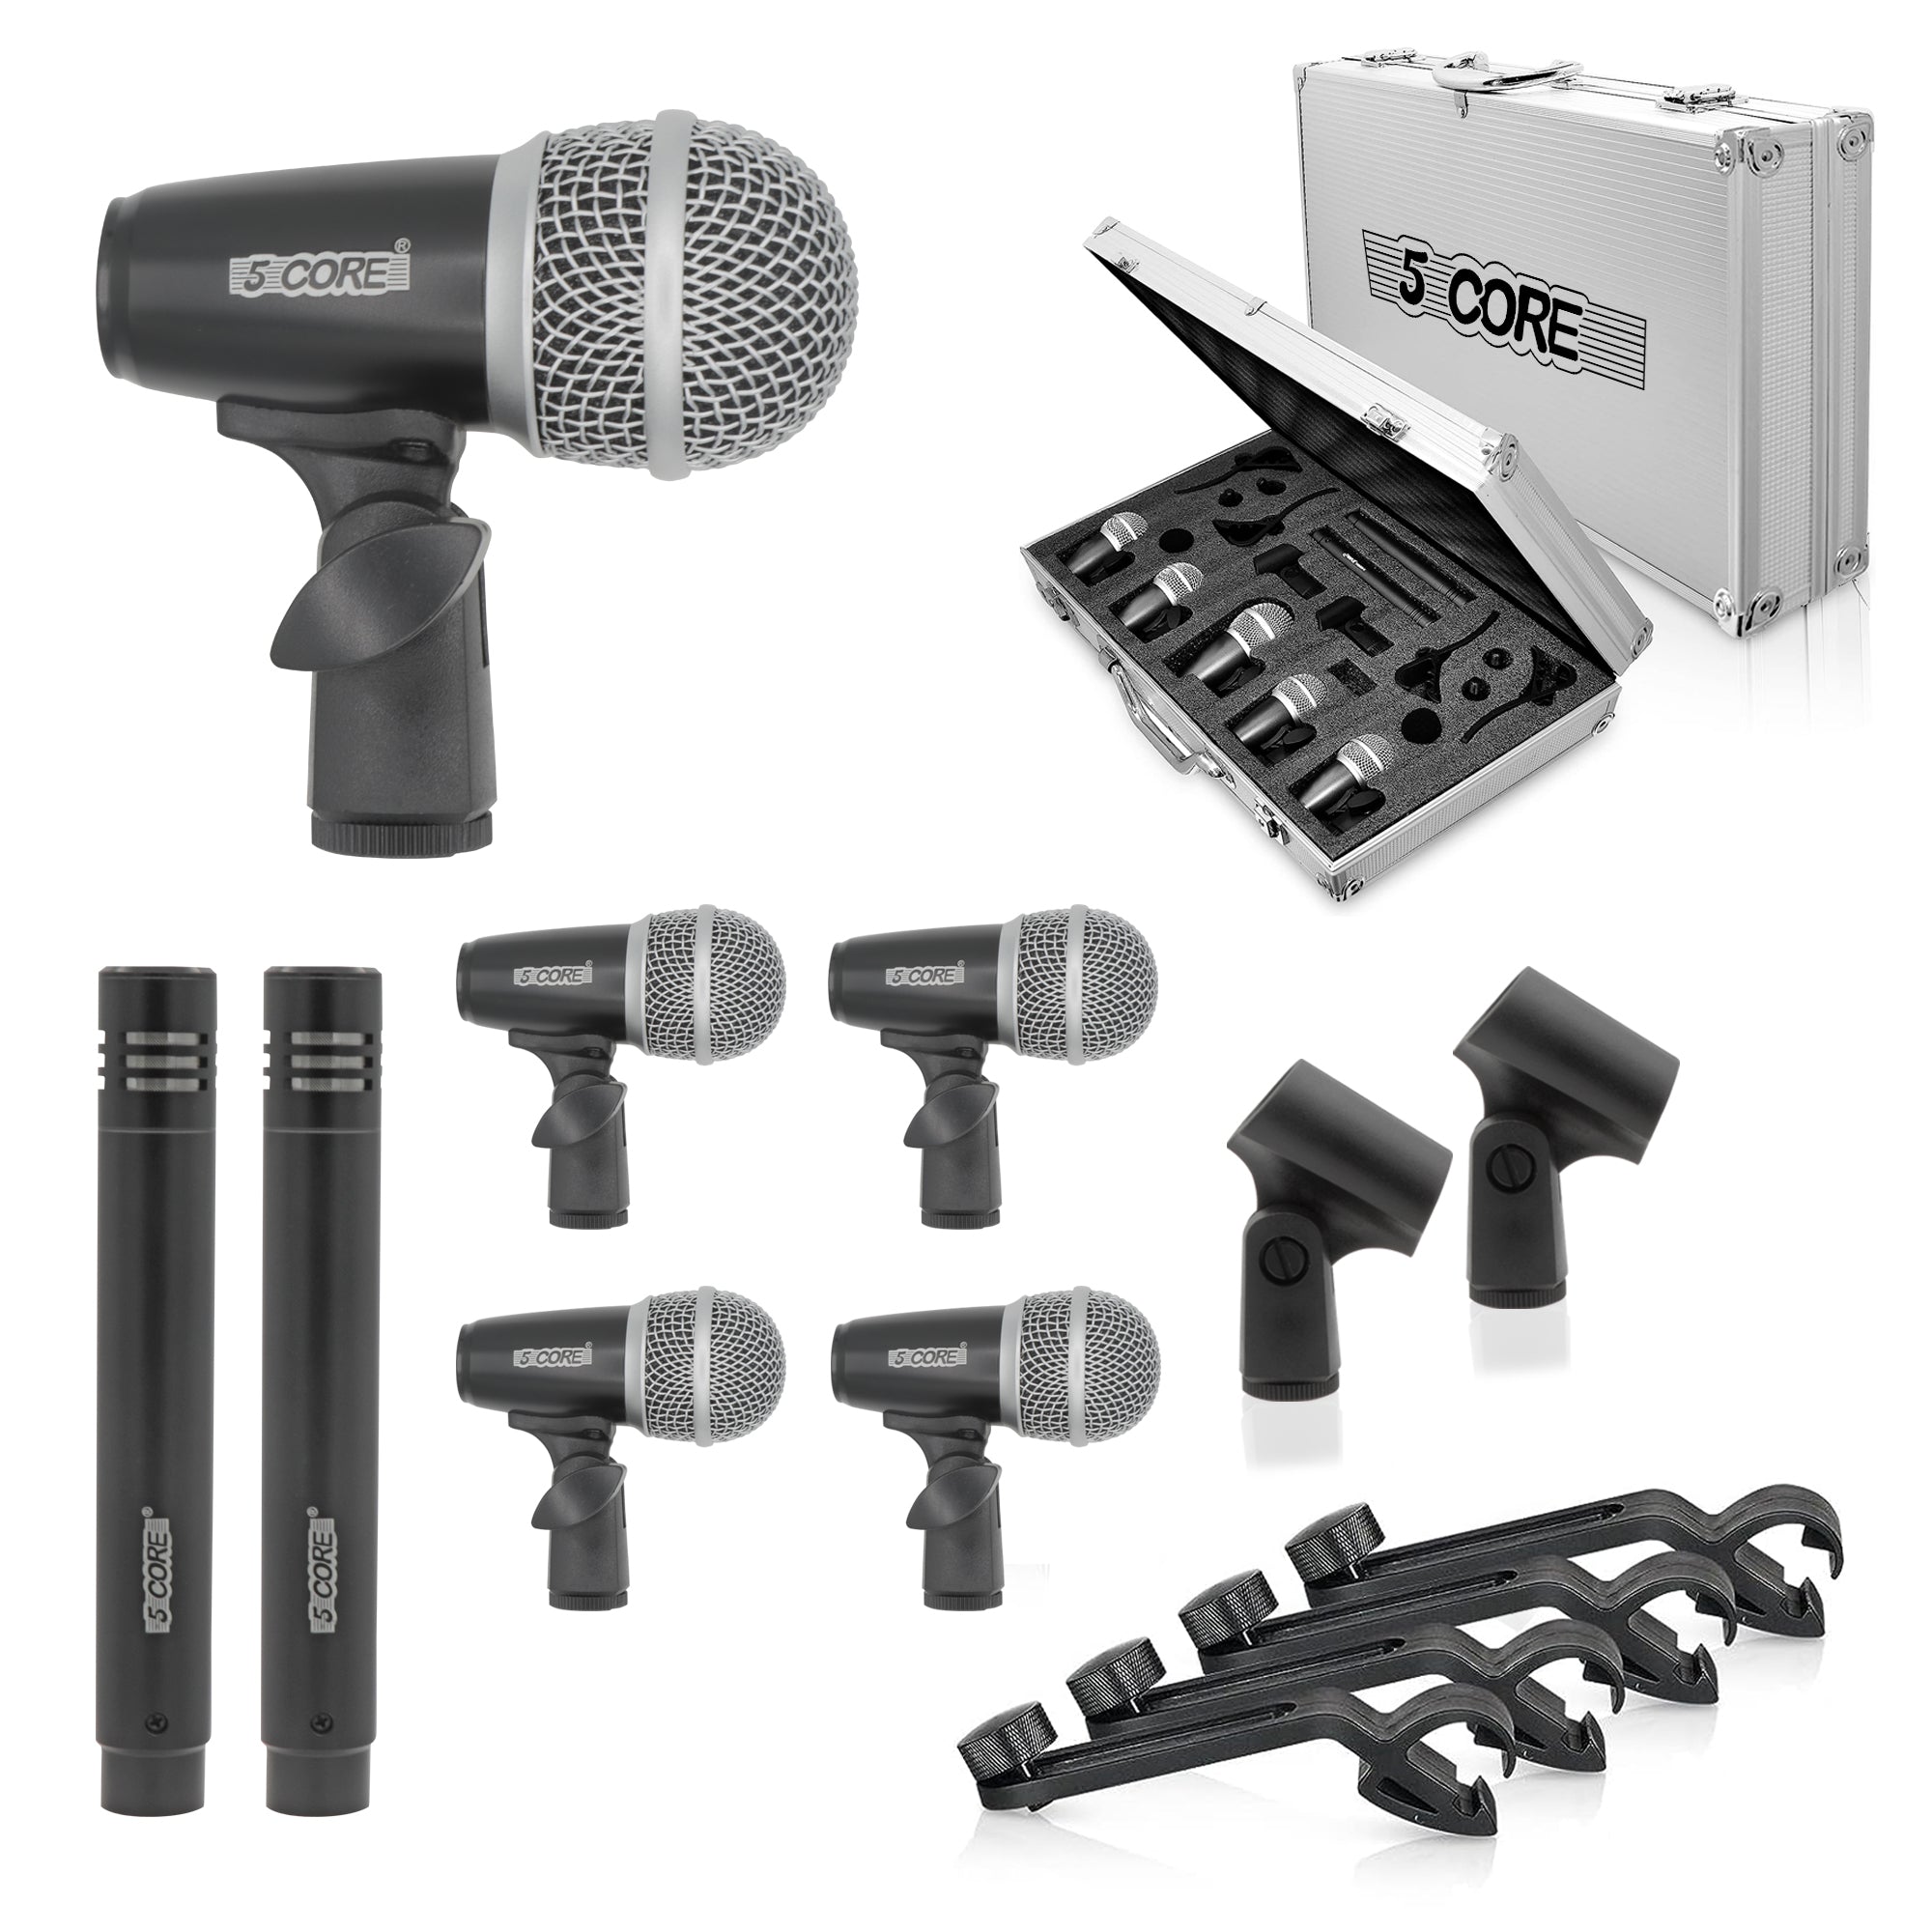 Professional drum microphone set for capturing every nuance of drum performance